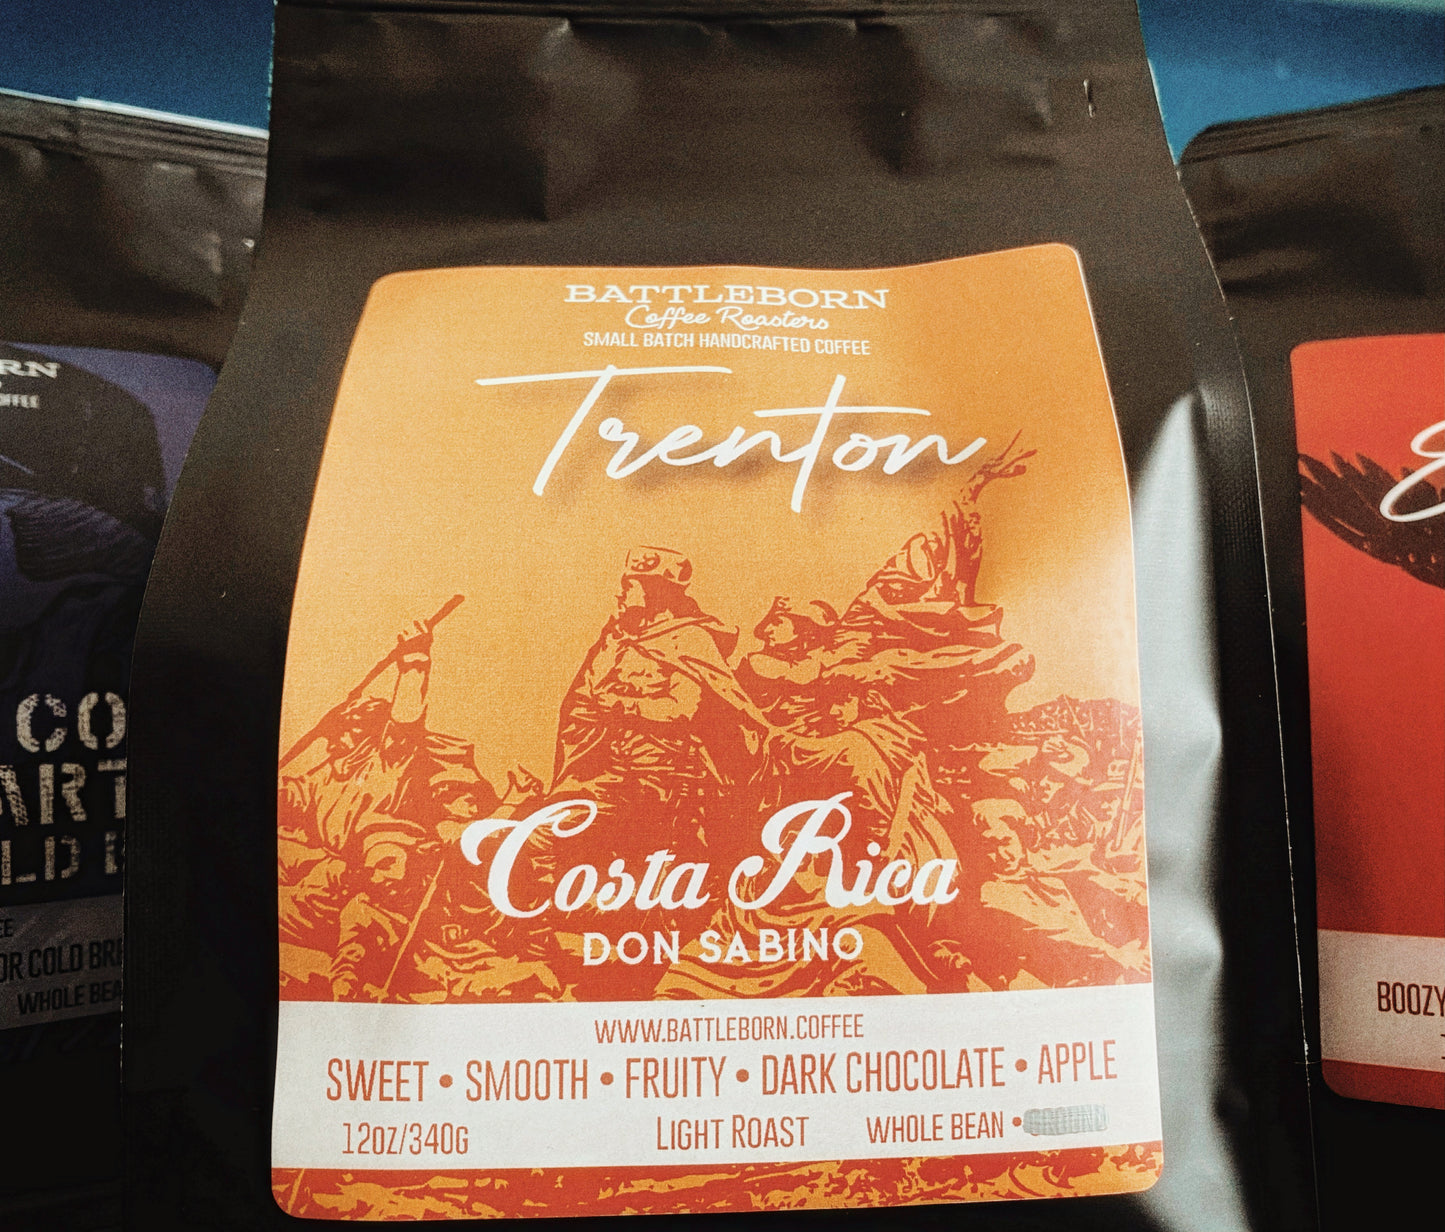 The Trenton - Costa Rica - Sustainably grown & harvested